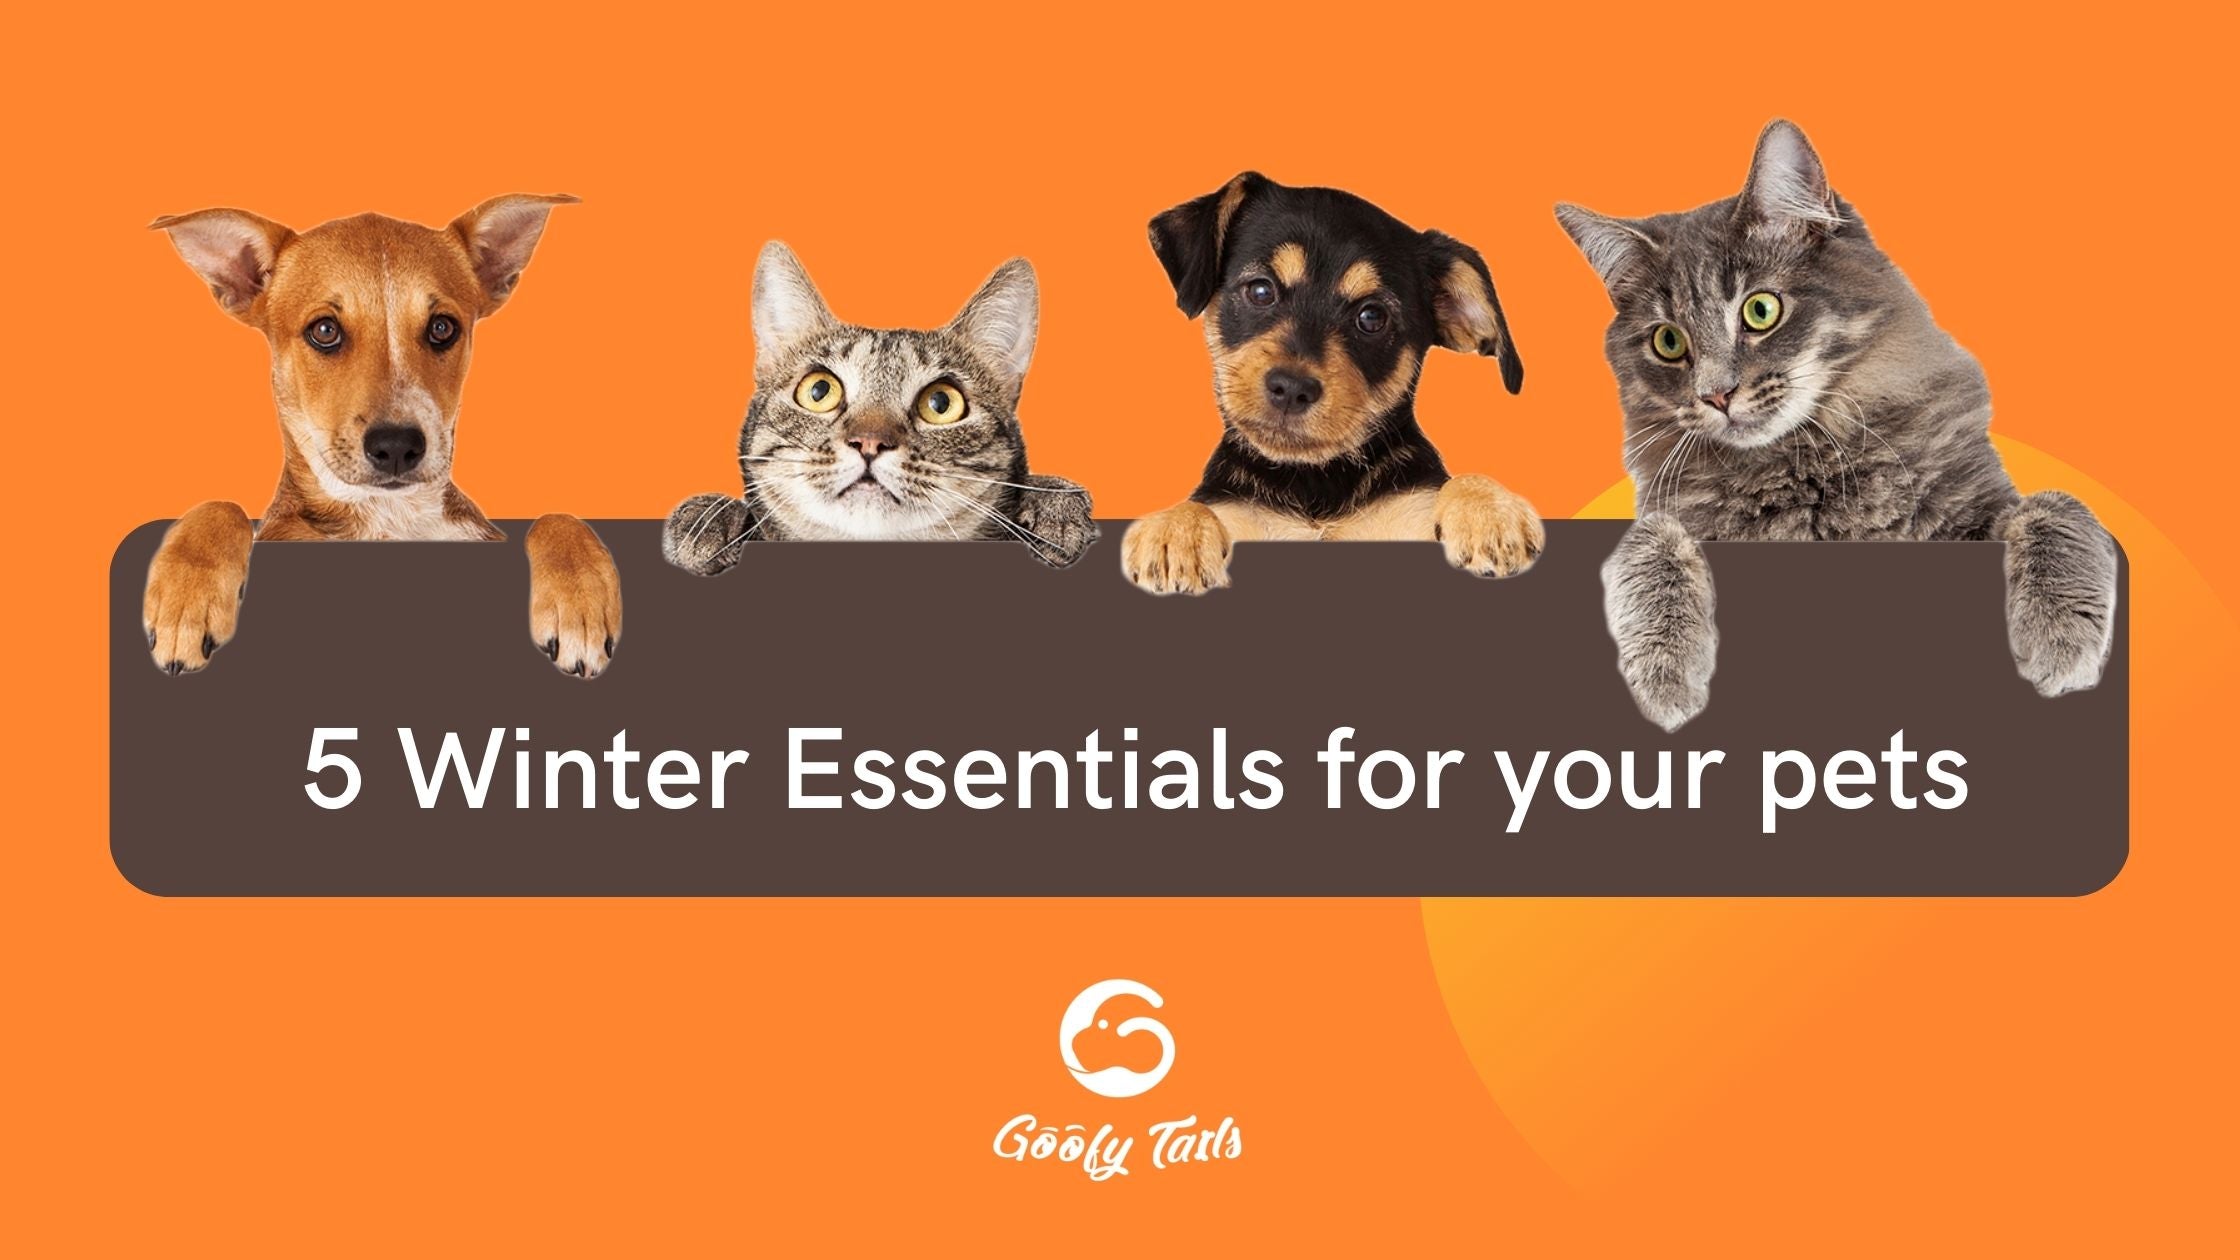 5 Winter Essentials for your pets